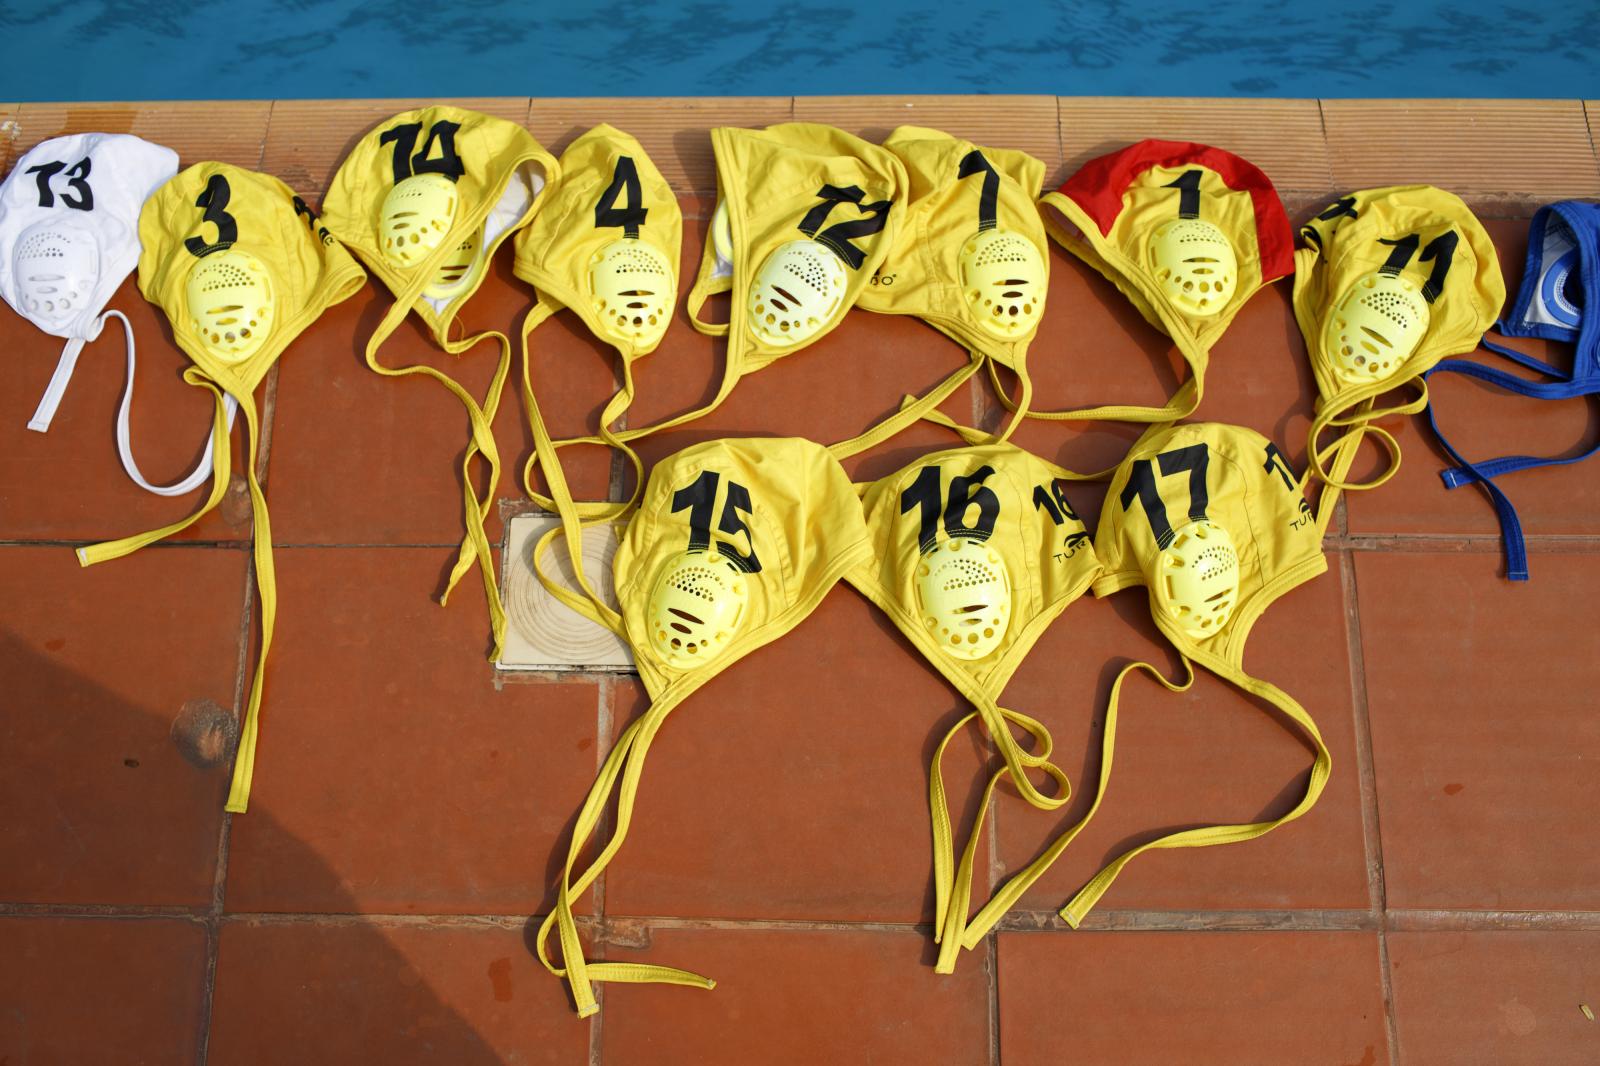 Image from Water Polo - Water polo caps are displayed by the poolside during an...